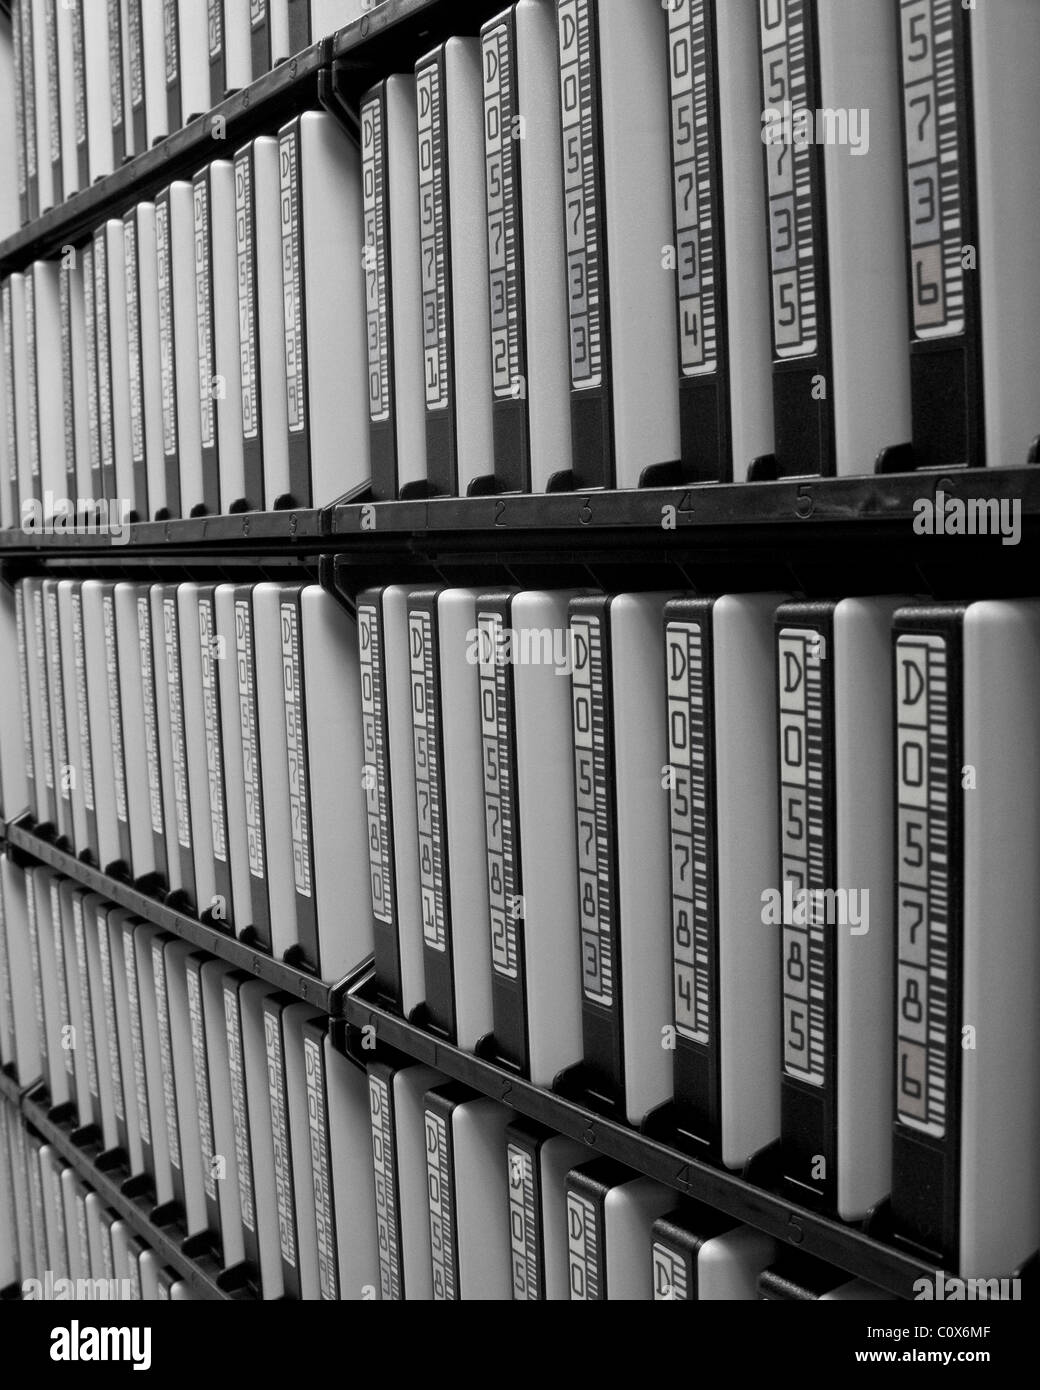 Rows of magnetic tape storage keep data secure Stock Photo